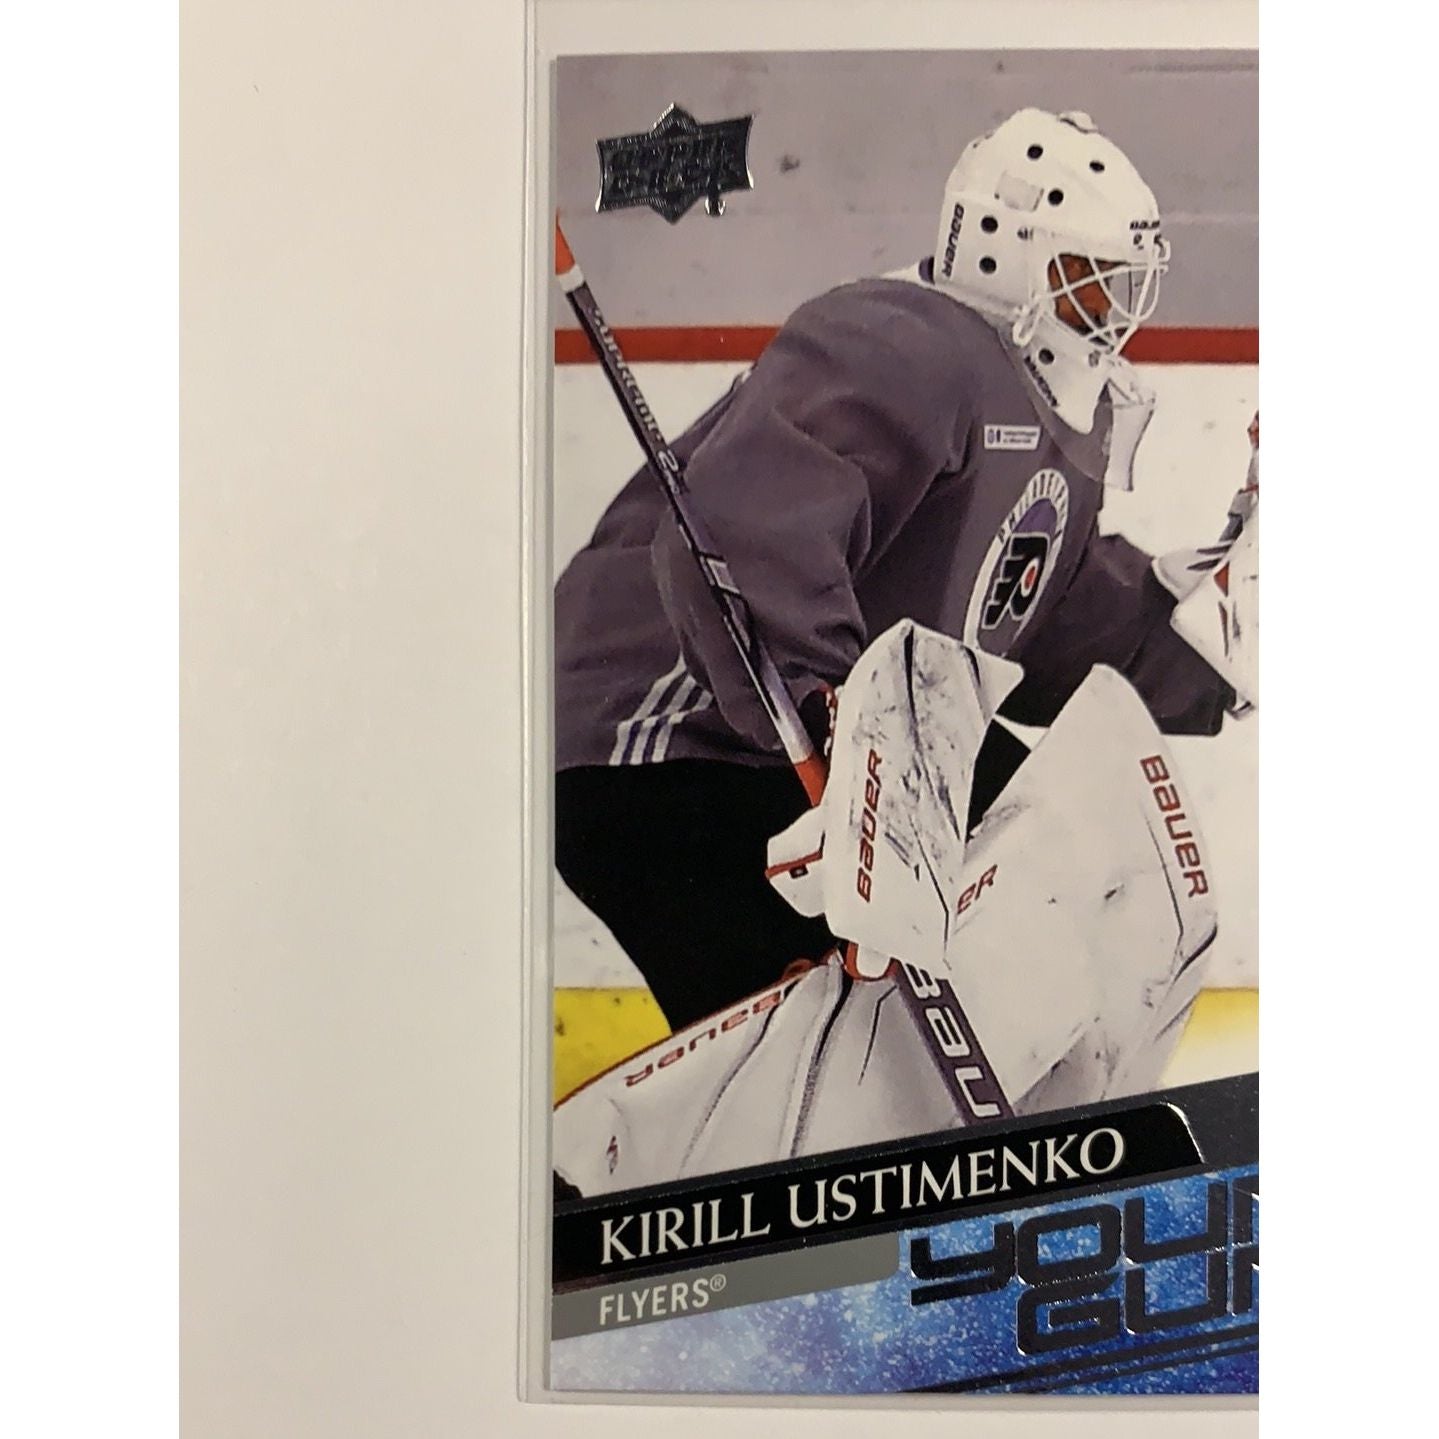  2020-21 Upper Deck Series 1 Kirill Ustimenko Young Guns  Local Legends Cards & Collectibles